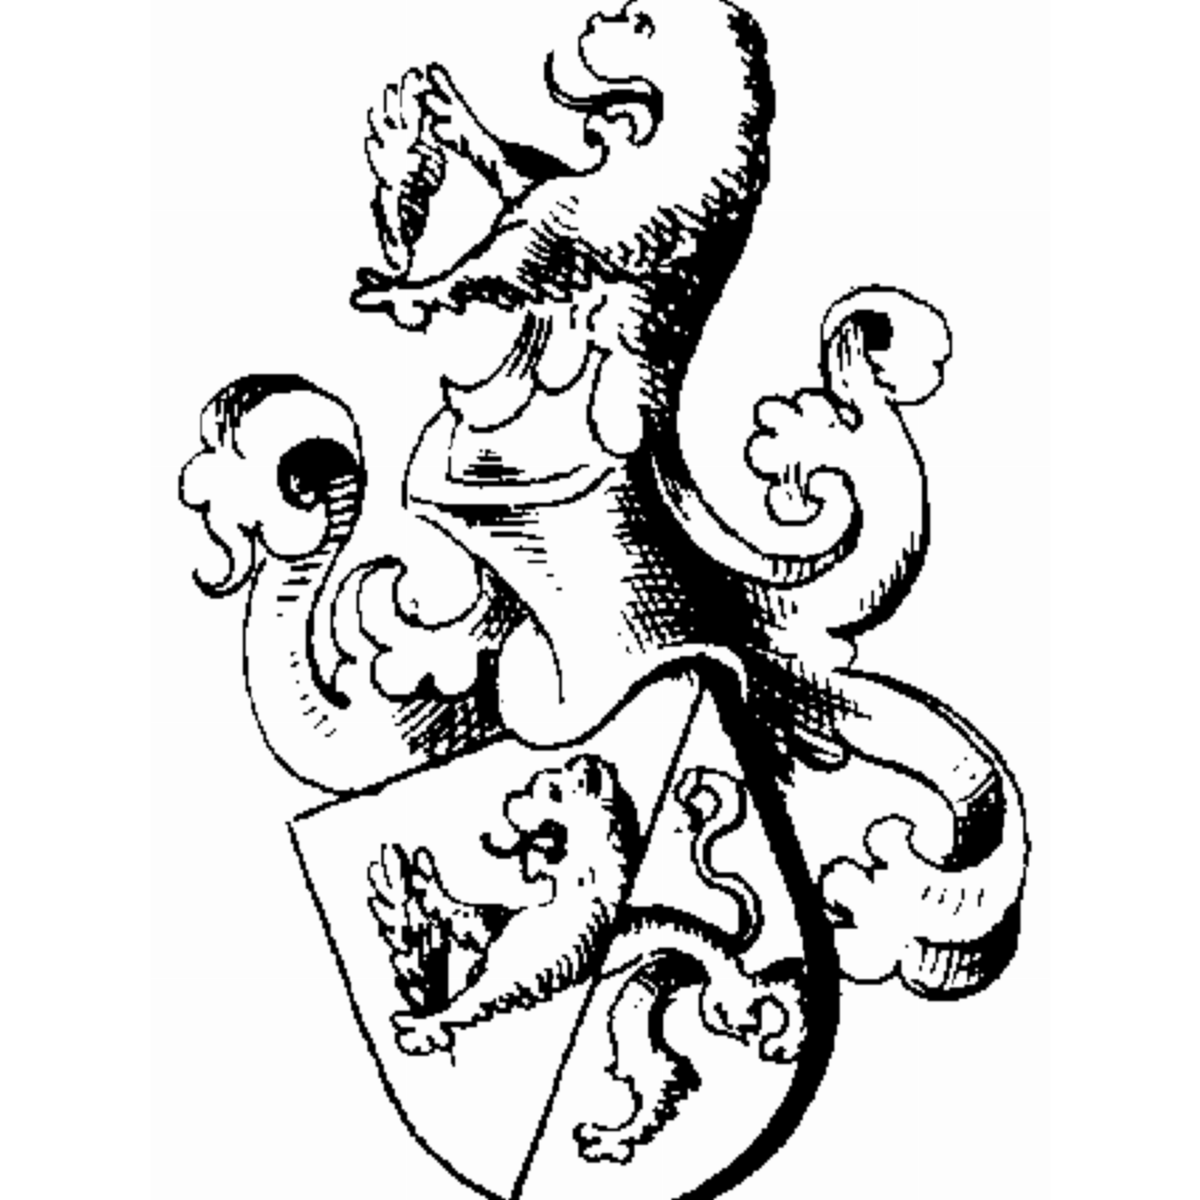 Coat of arms of family Vidal